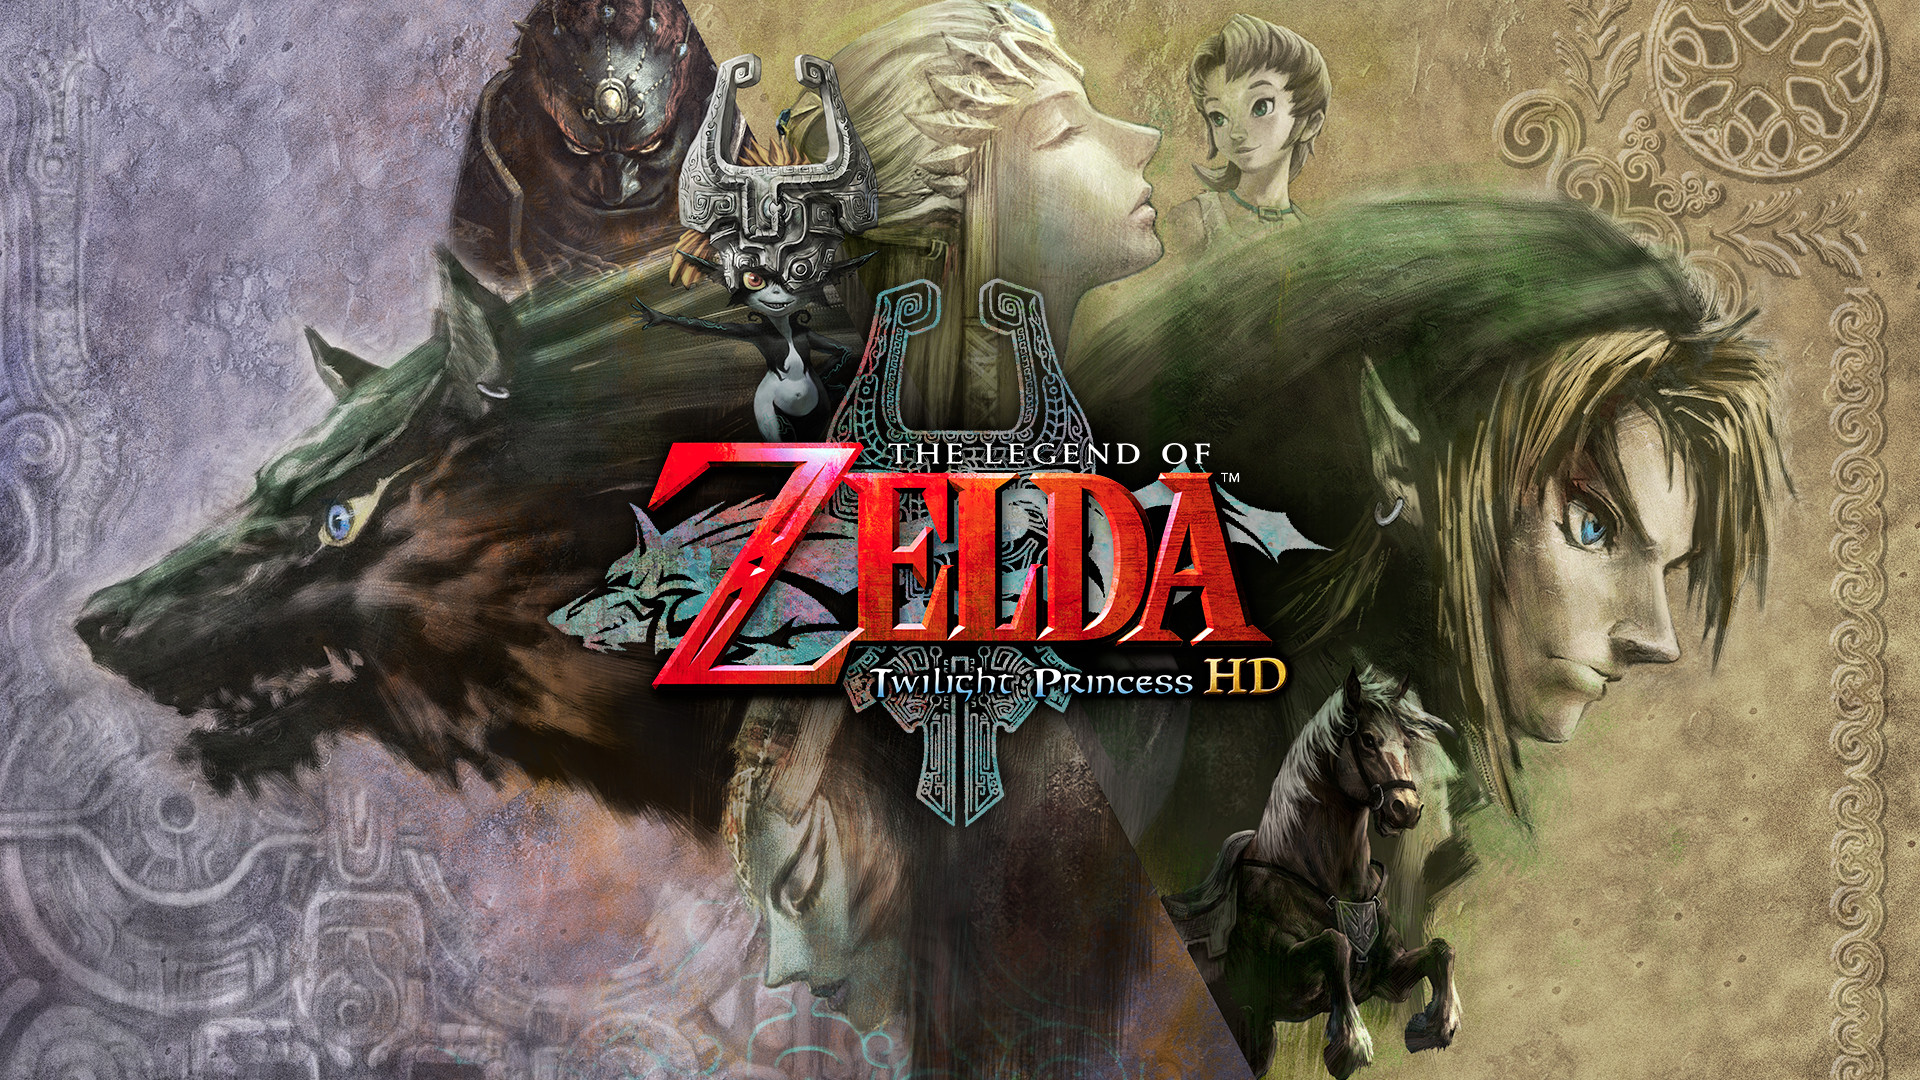 1920x1080 The Legend of Zelda: Twilight Princess HD Review – Bark at the Moon